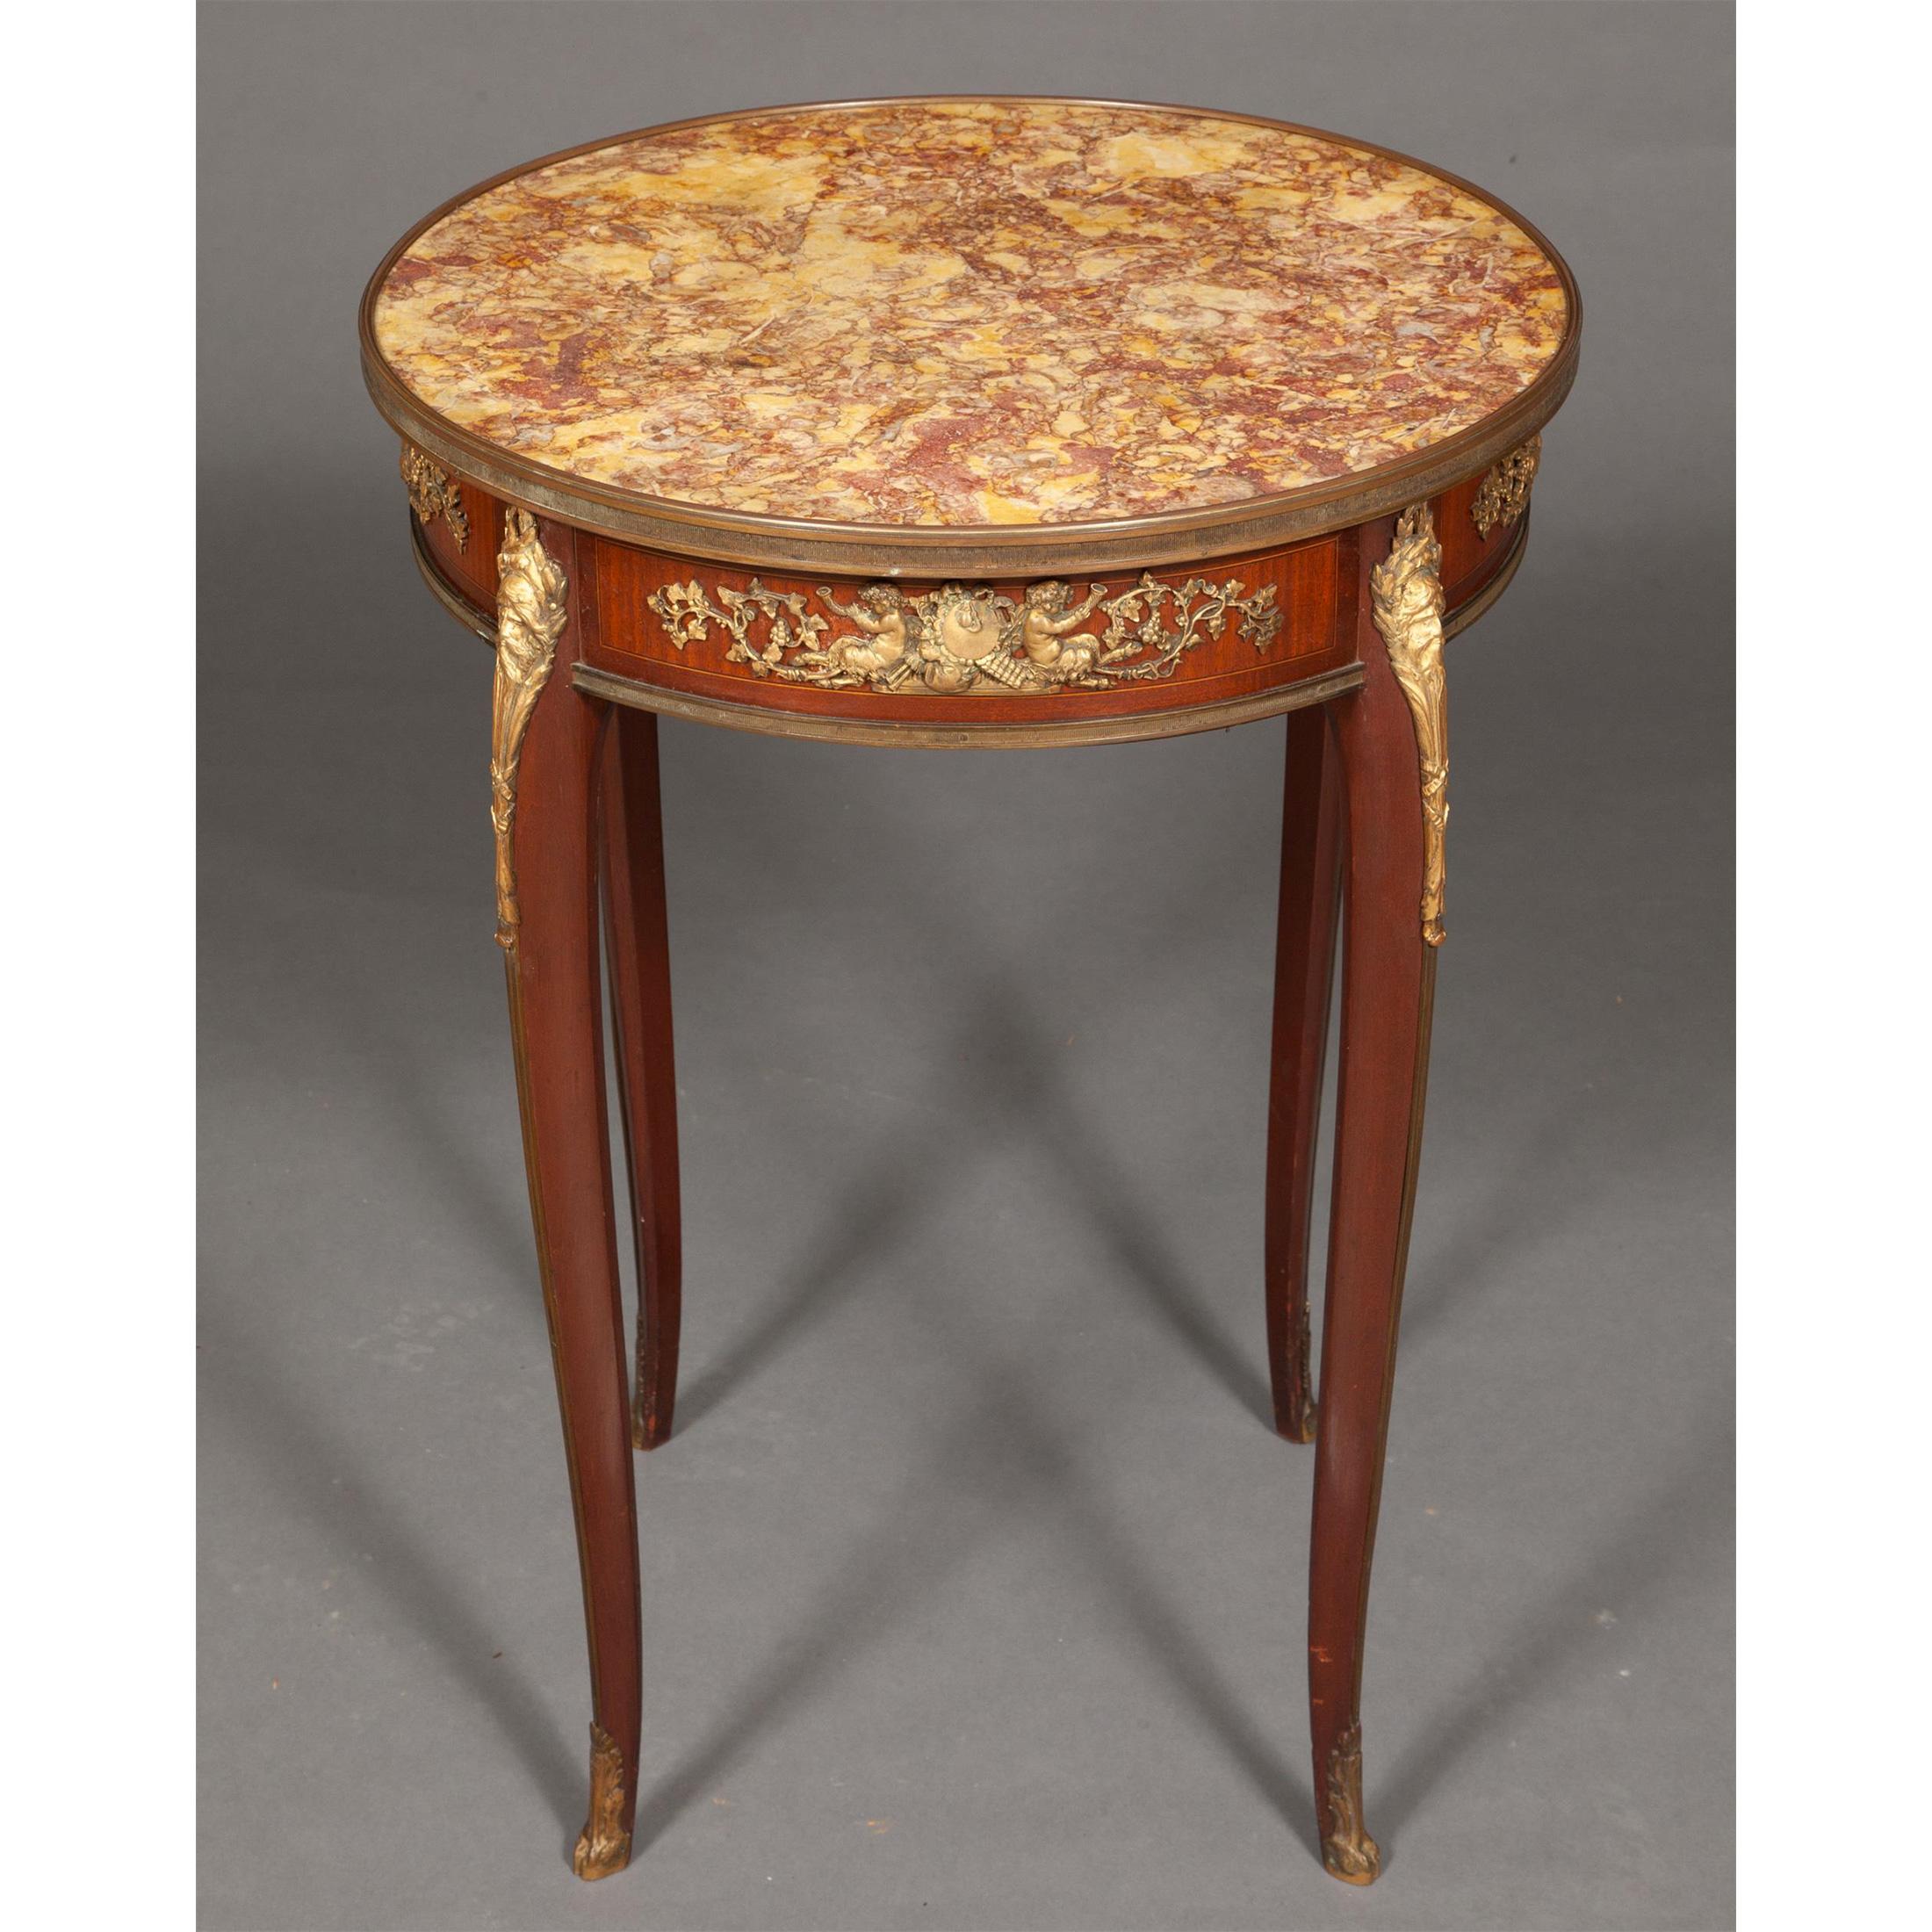 A fine quality French gilt-bronze mounted mahogany marble-top round corner table.

Date: 19th century
Origin: French
Dimension: 29 in. x 21 1/2 in.